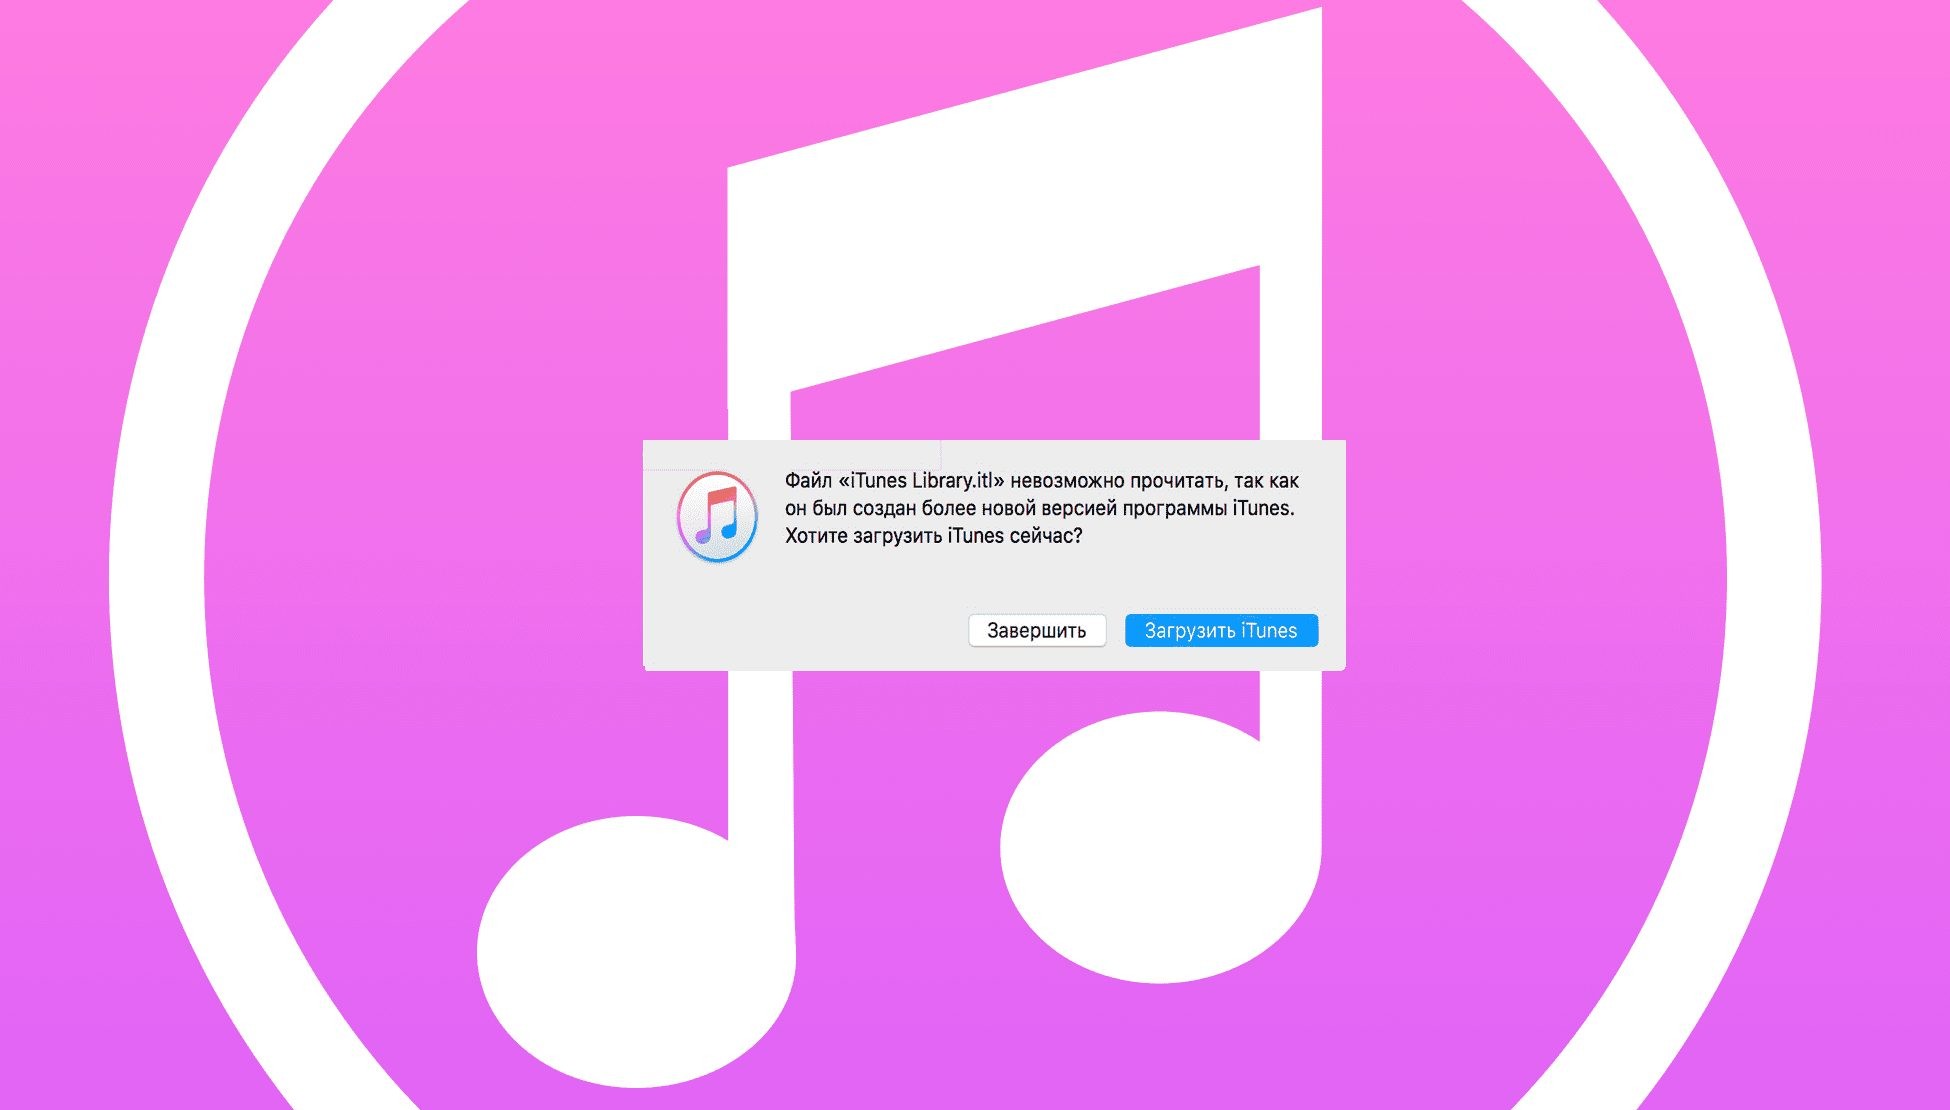 ITUNES Library ITL невозможно прочитать. File ITUNES Library ITL cannot be read. Файл itunes library